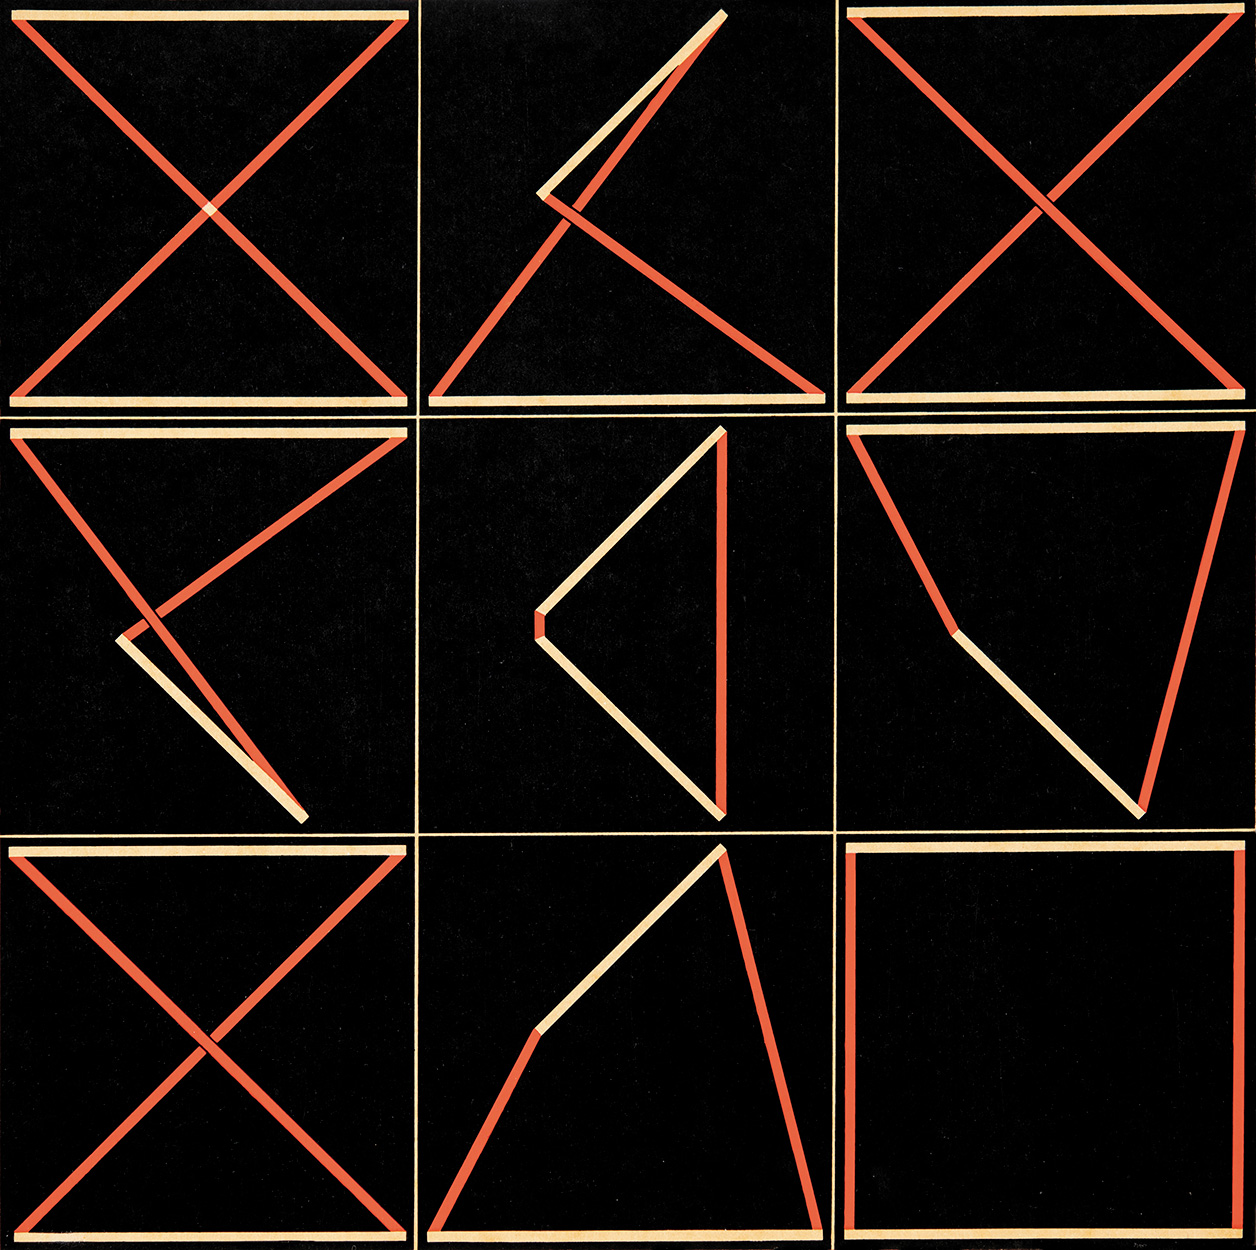 Mengyán András (1945) Logic of Forms